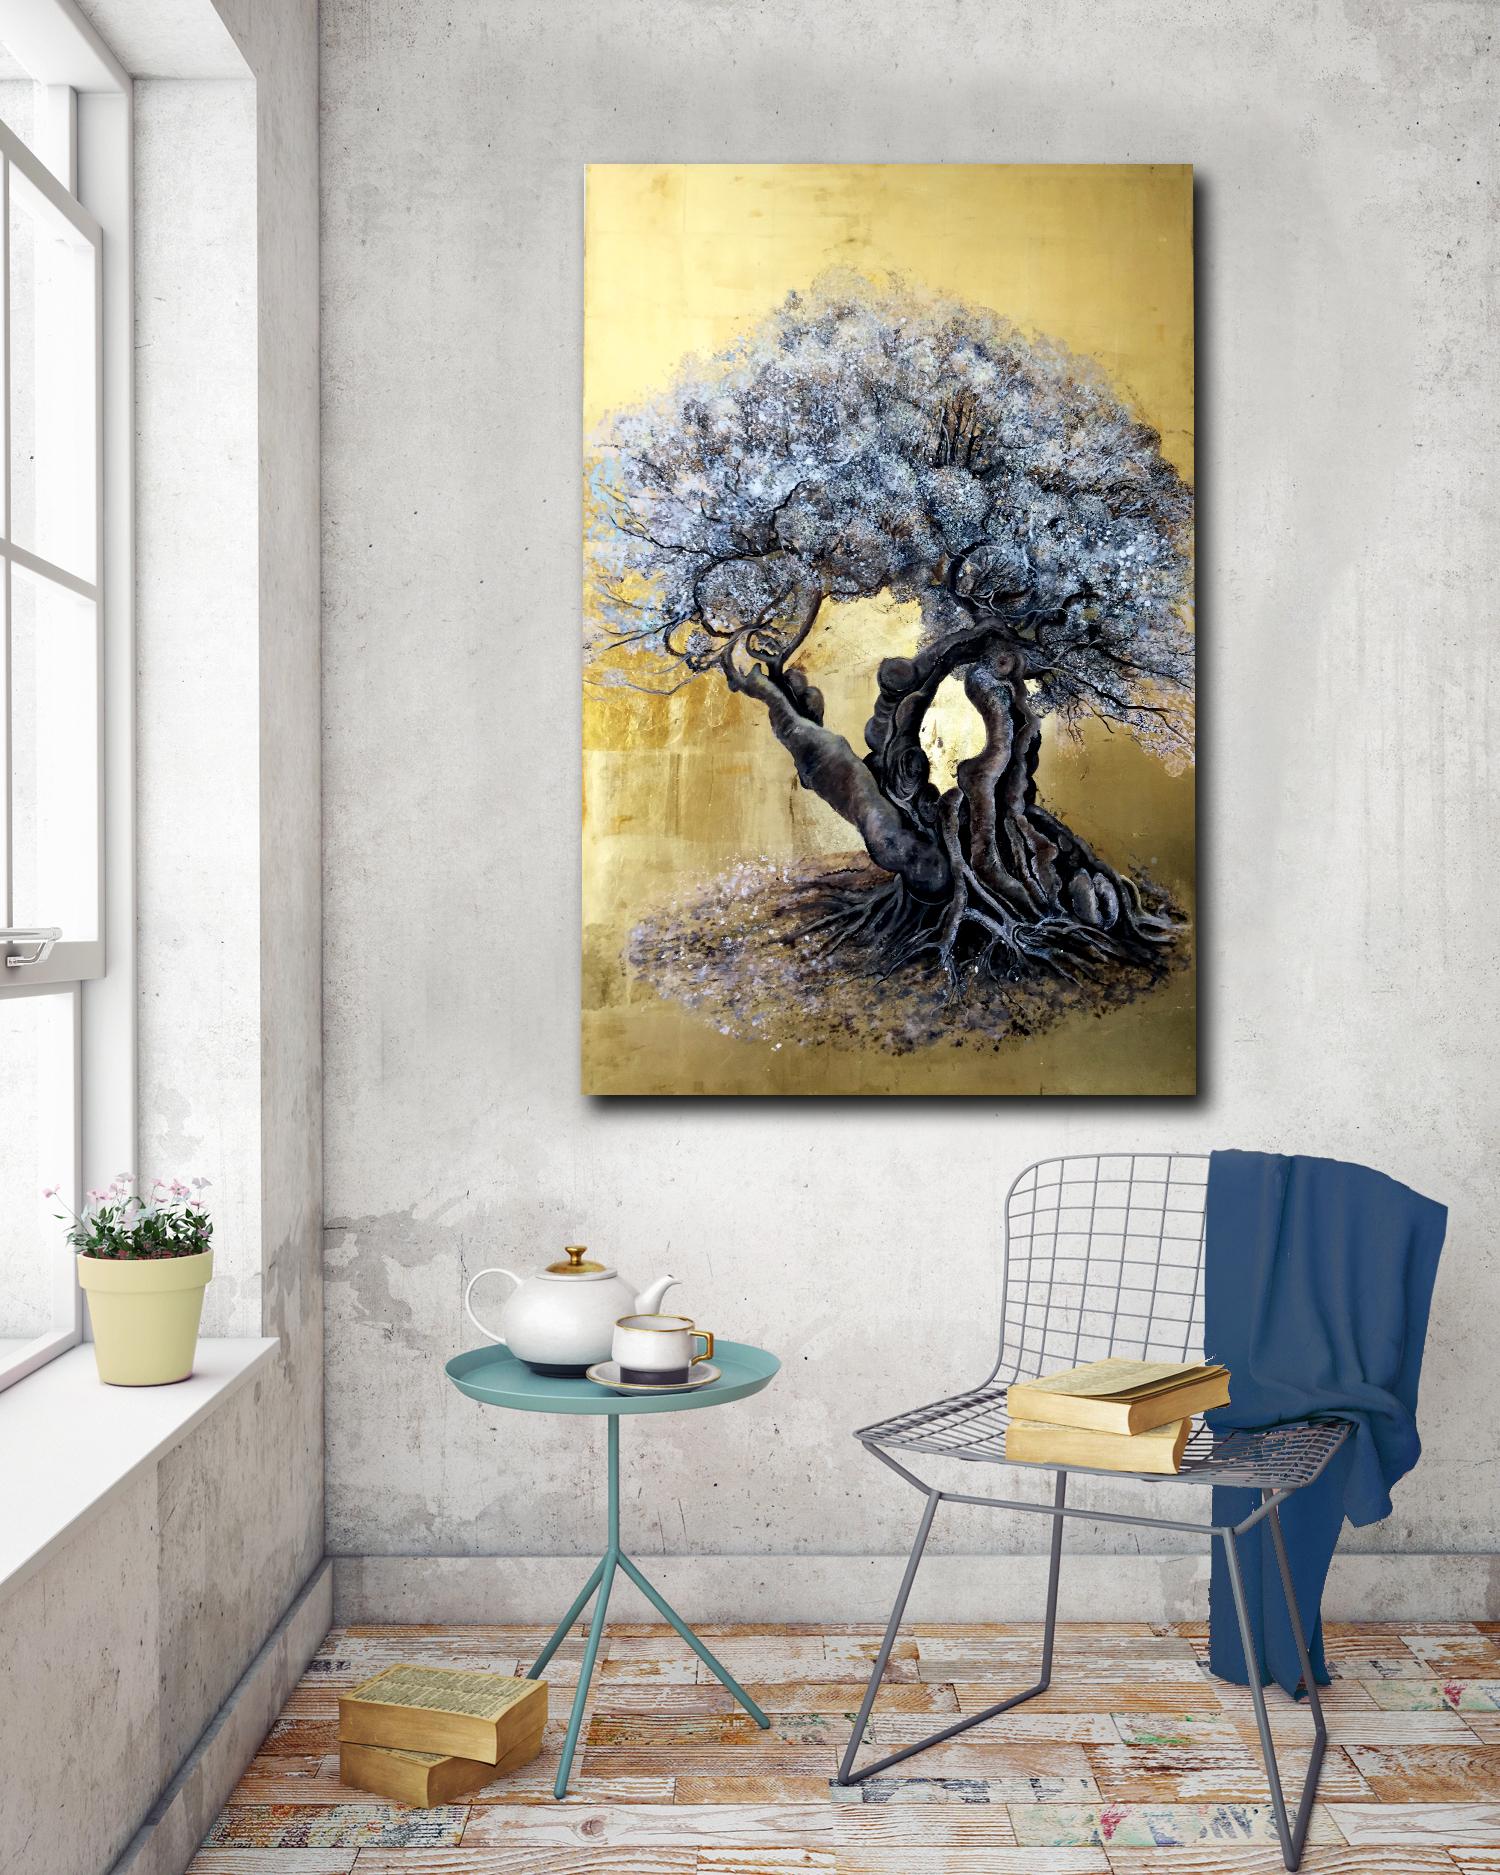 How Time Goes By and Yet it Blossoms - a romantic olive tree painting with gold  - Painting by Anastasia Gklava